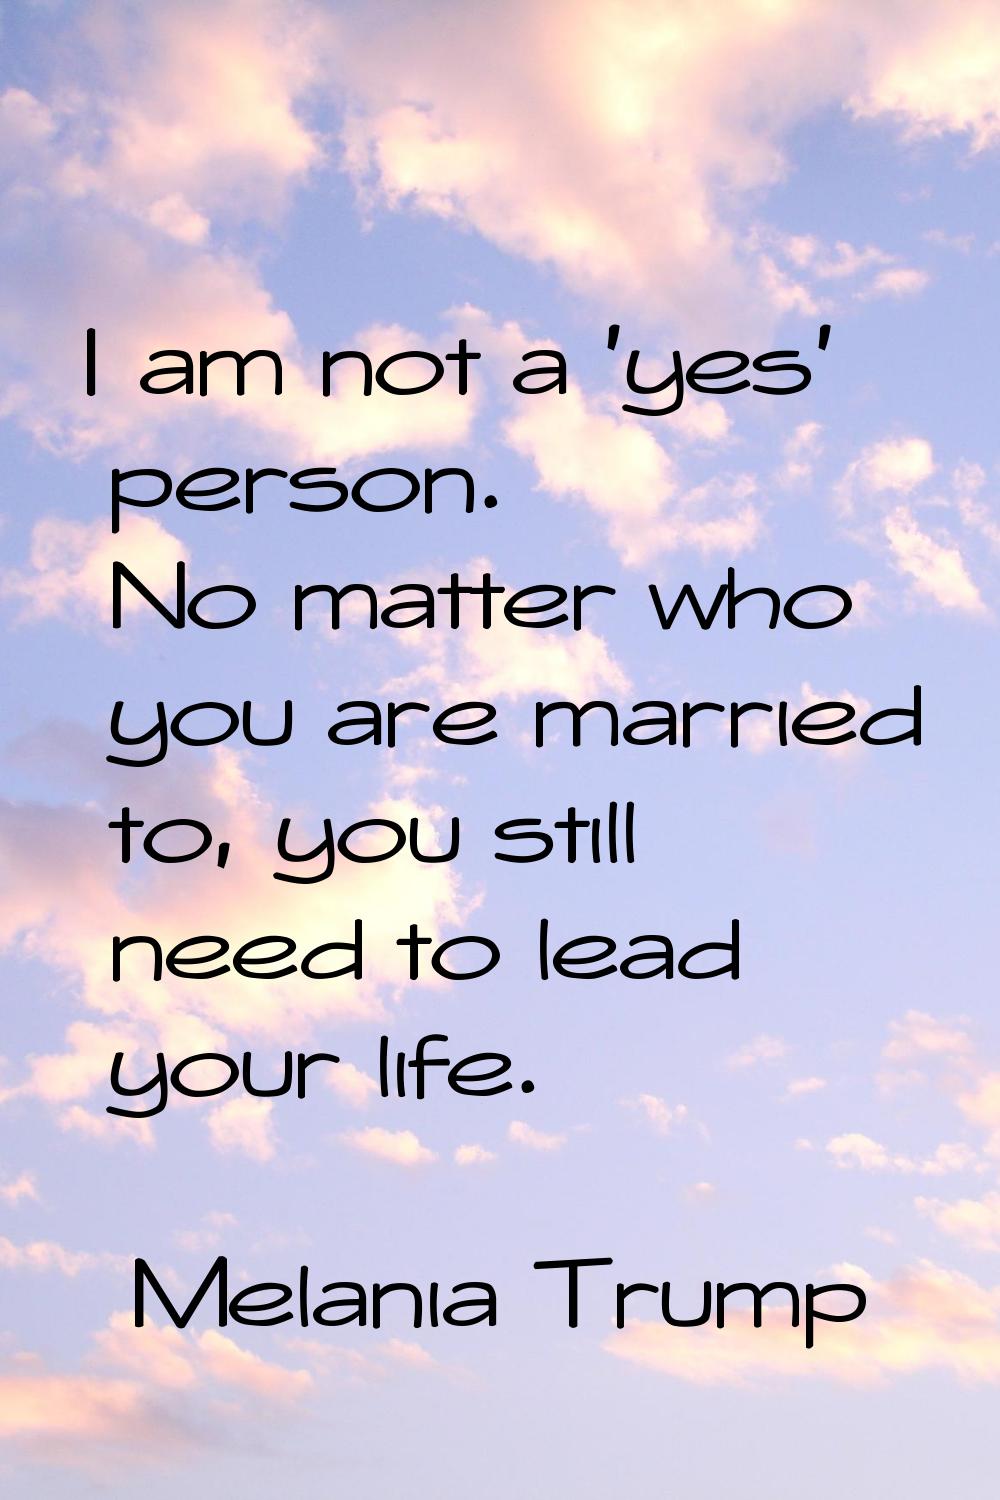 I am not a 'yes' person. No matter who you are married to, you still need to lead your life.